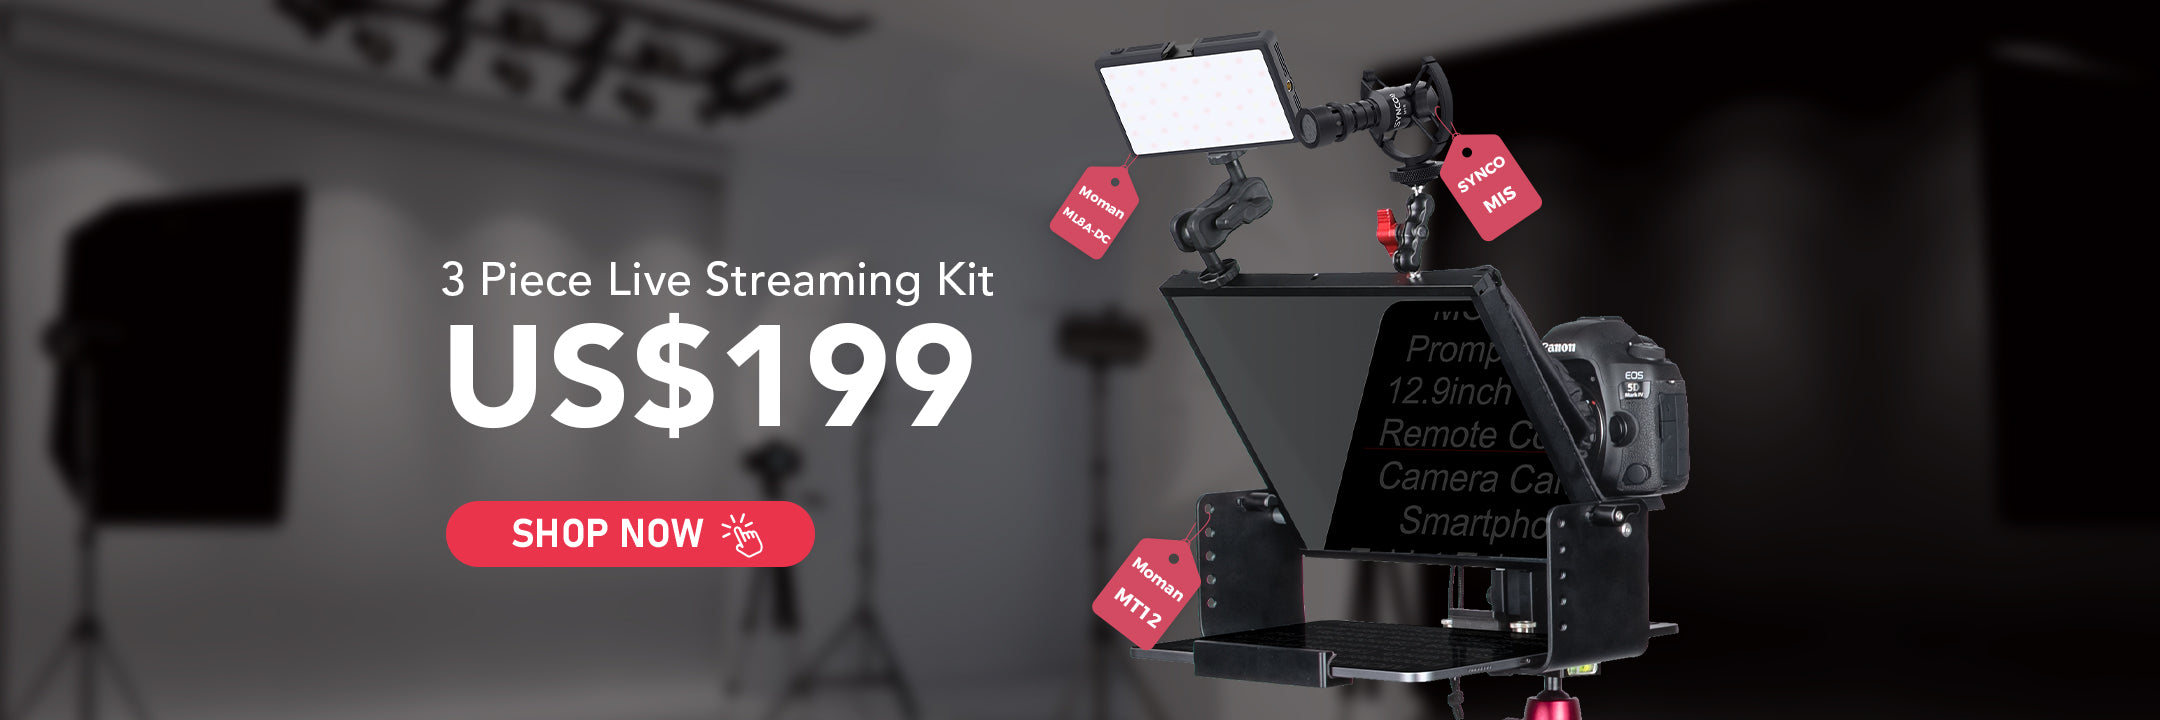 Moman MT12 3-piece live streaming kit includes the laptop teleprompter, a LED panel light, and a shotgun microphone. It supports great performance and video effects in vlogs, live streams, broadcast, etc.